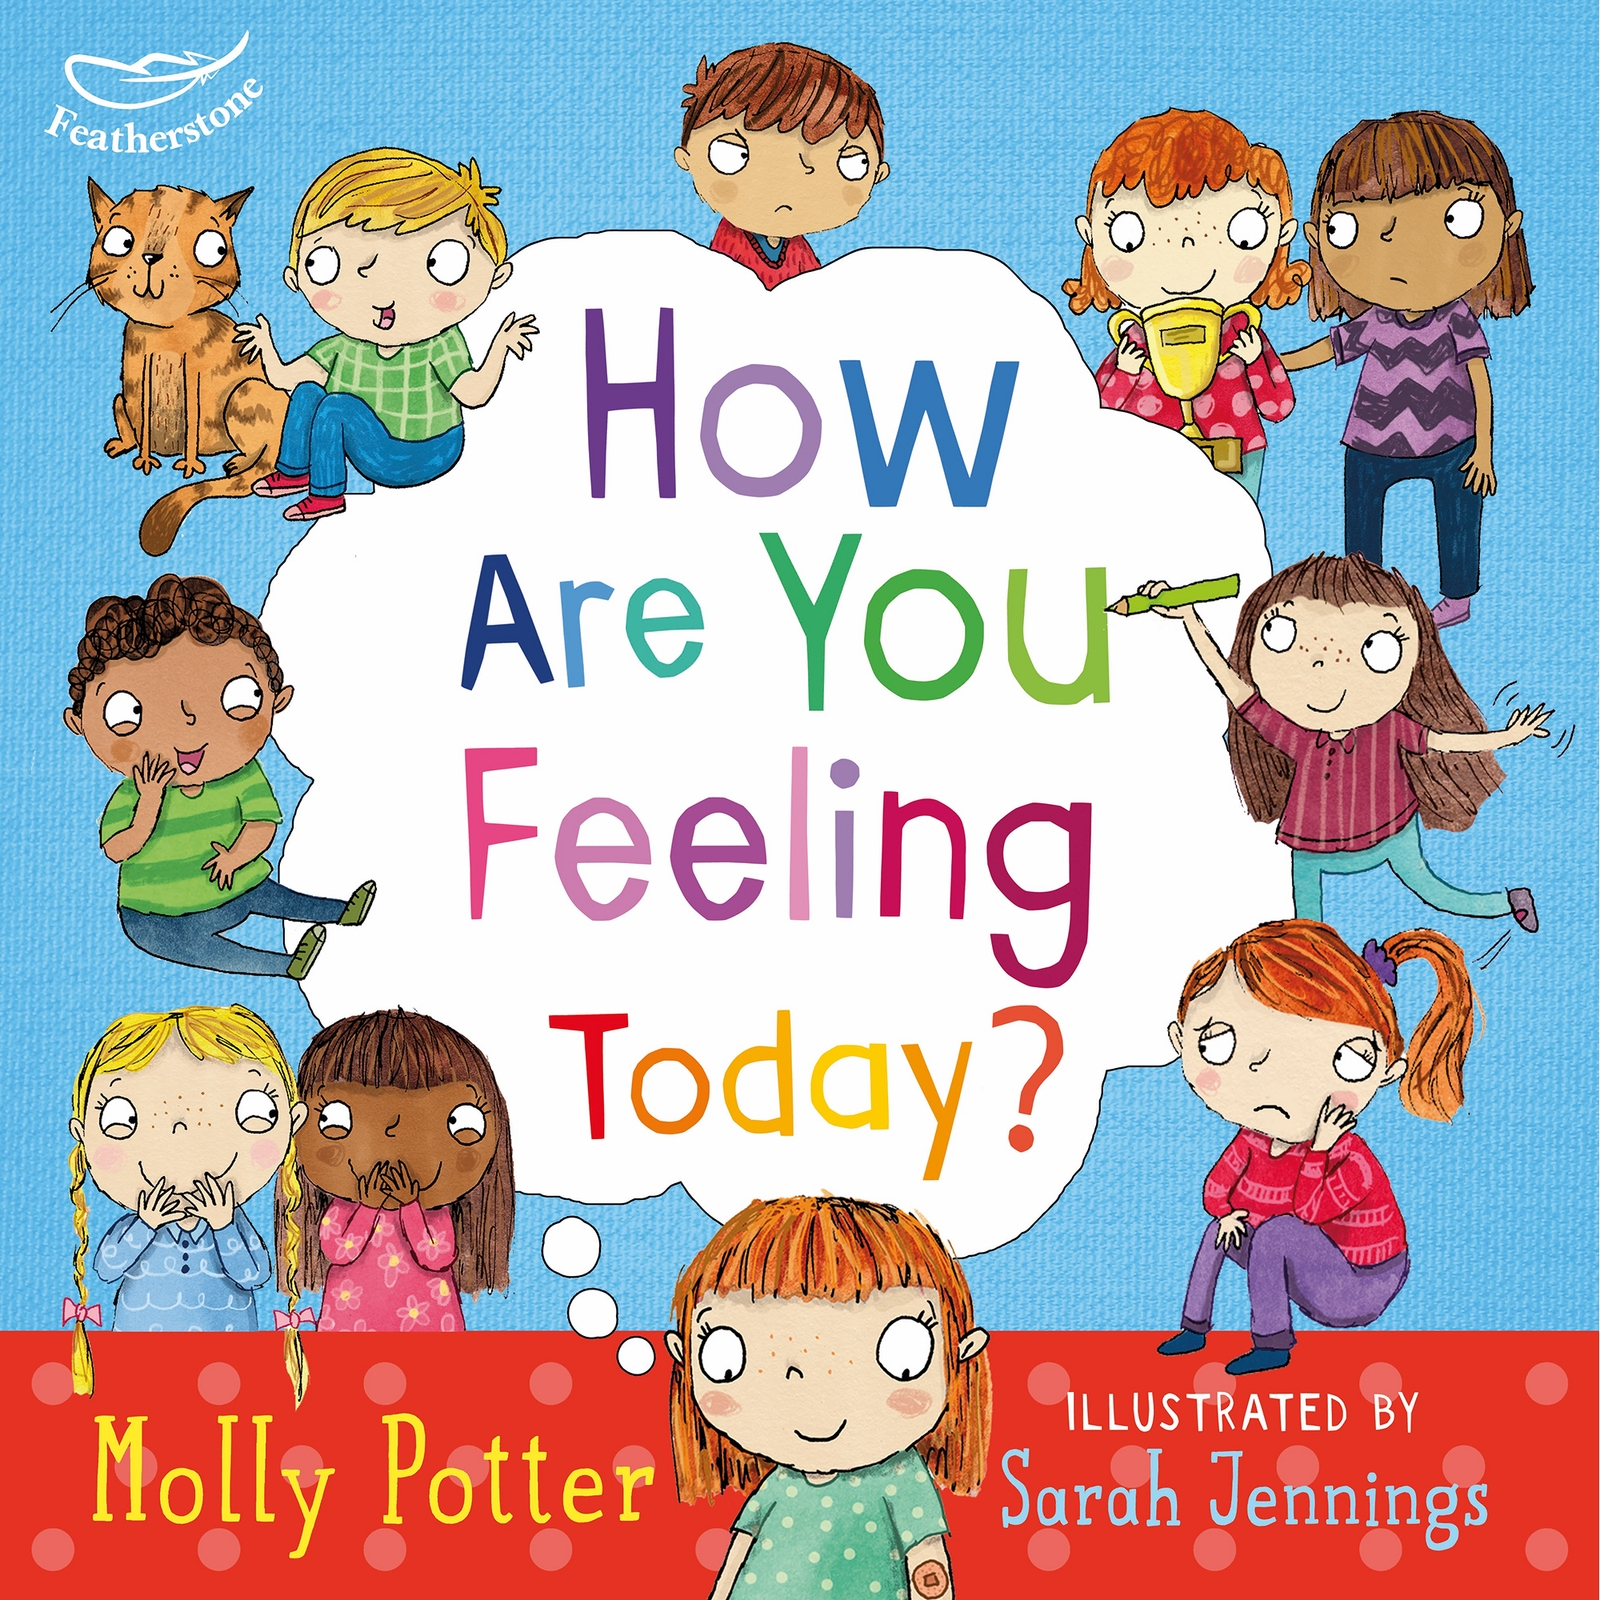 How Are You Feeling Book Pack - Assorted - Set of 3